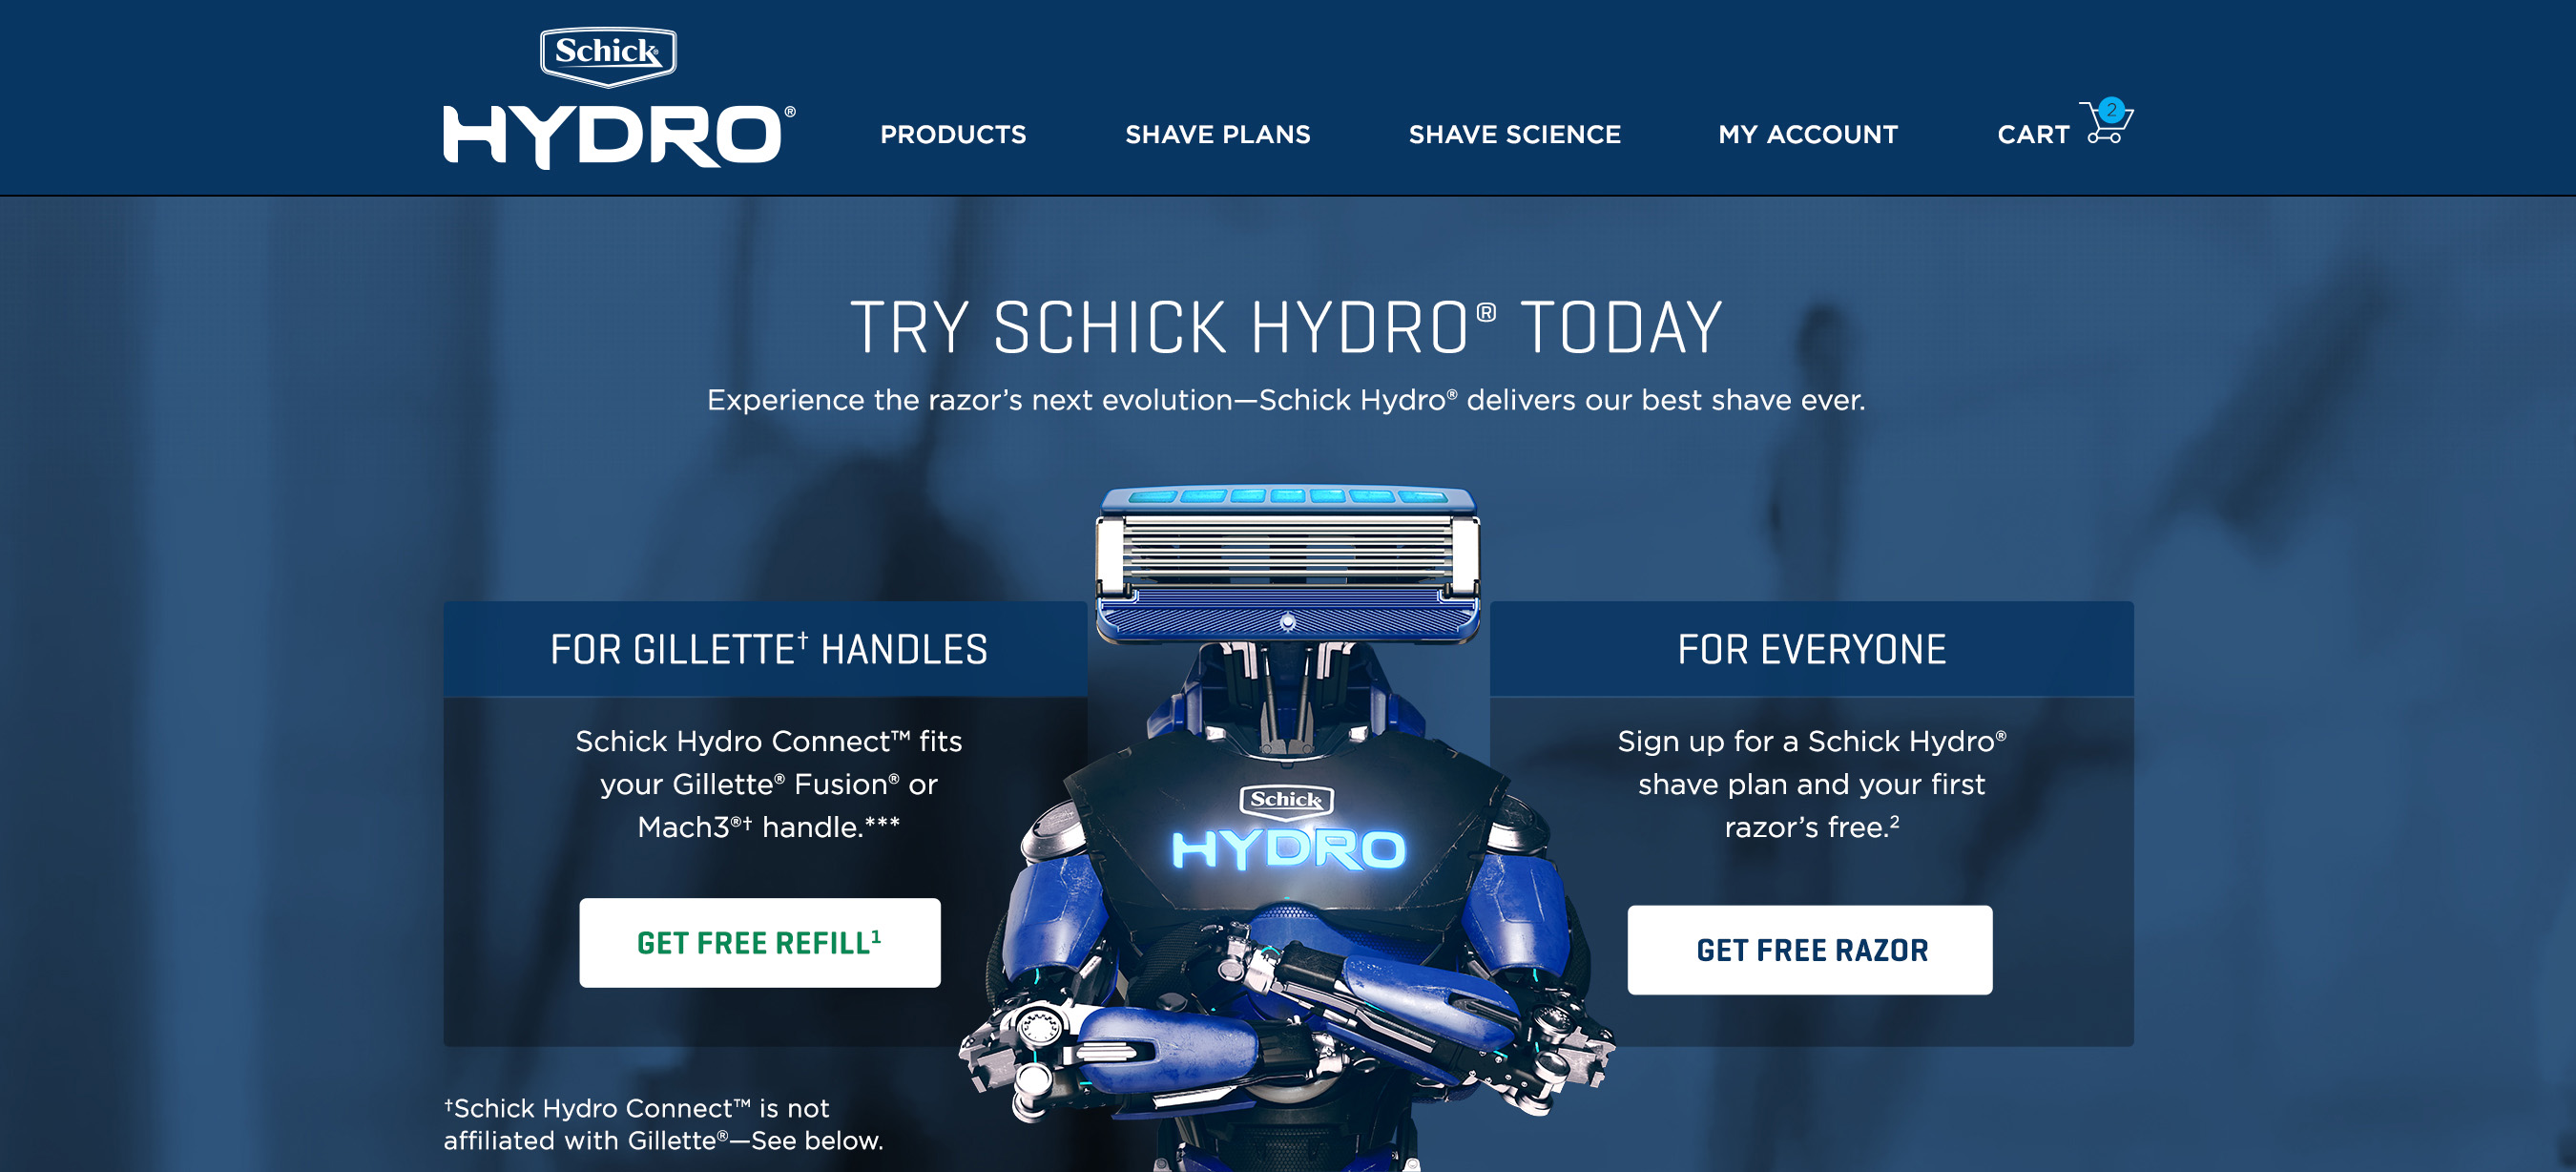 SchickHydro.com – Schick Hydro’s new direct-to-consumer platform – makes it easier to experience the clean, comfortable shave of the new Schick Hydro Connect™ and other Schick Hydro® products. †Schick Hydro Connect™ is not manufactured or distributed by The Gillette Company LLC, owner of the registered trademarks Gillette®, Fusion® and Mach3®.